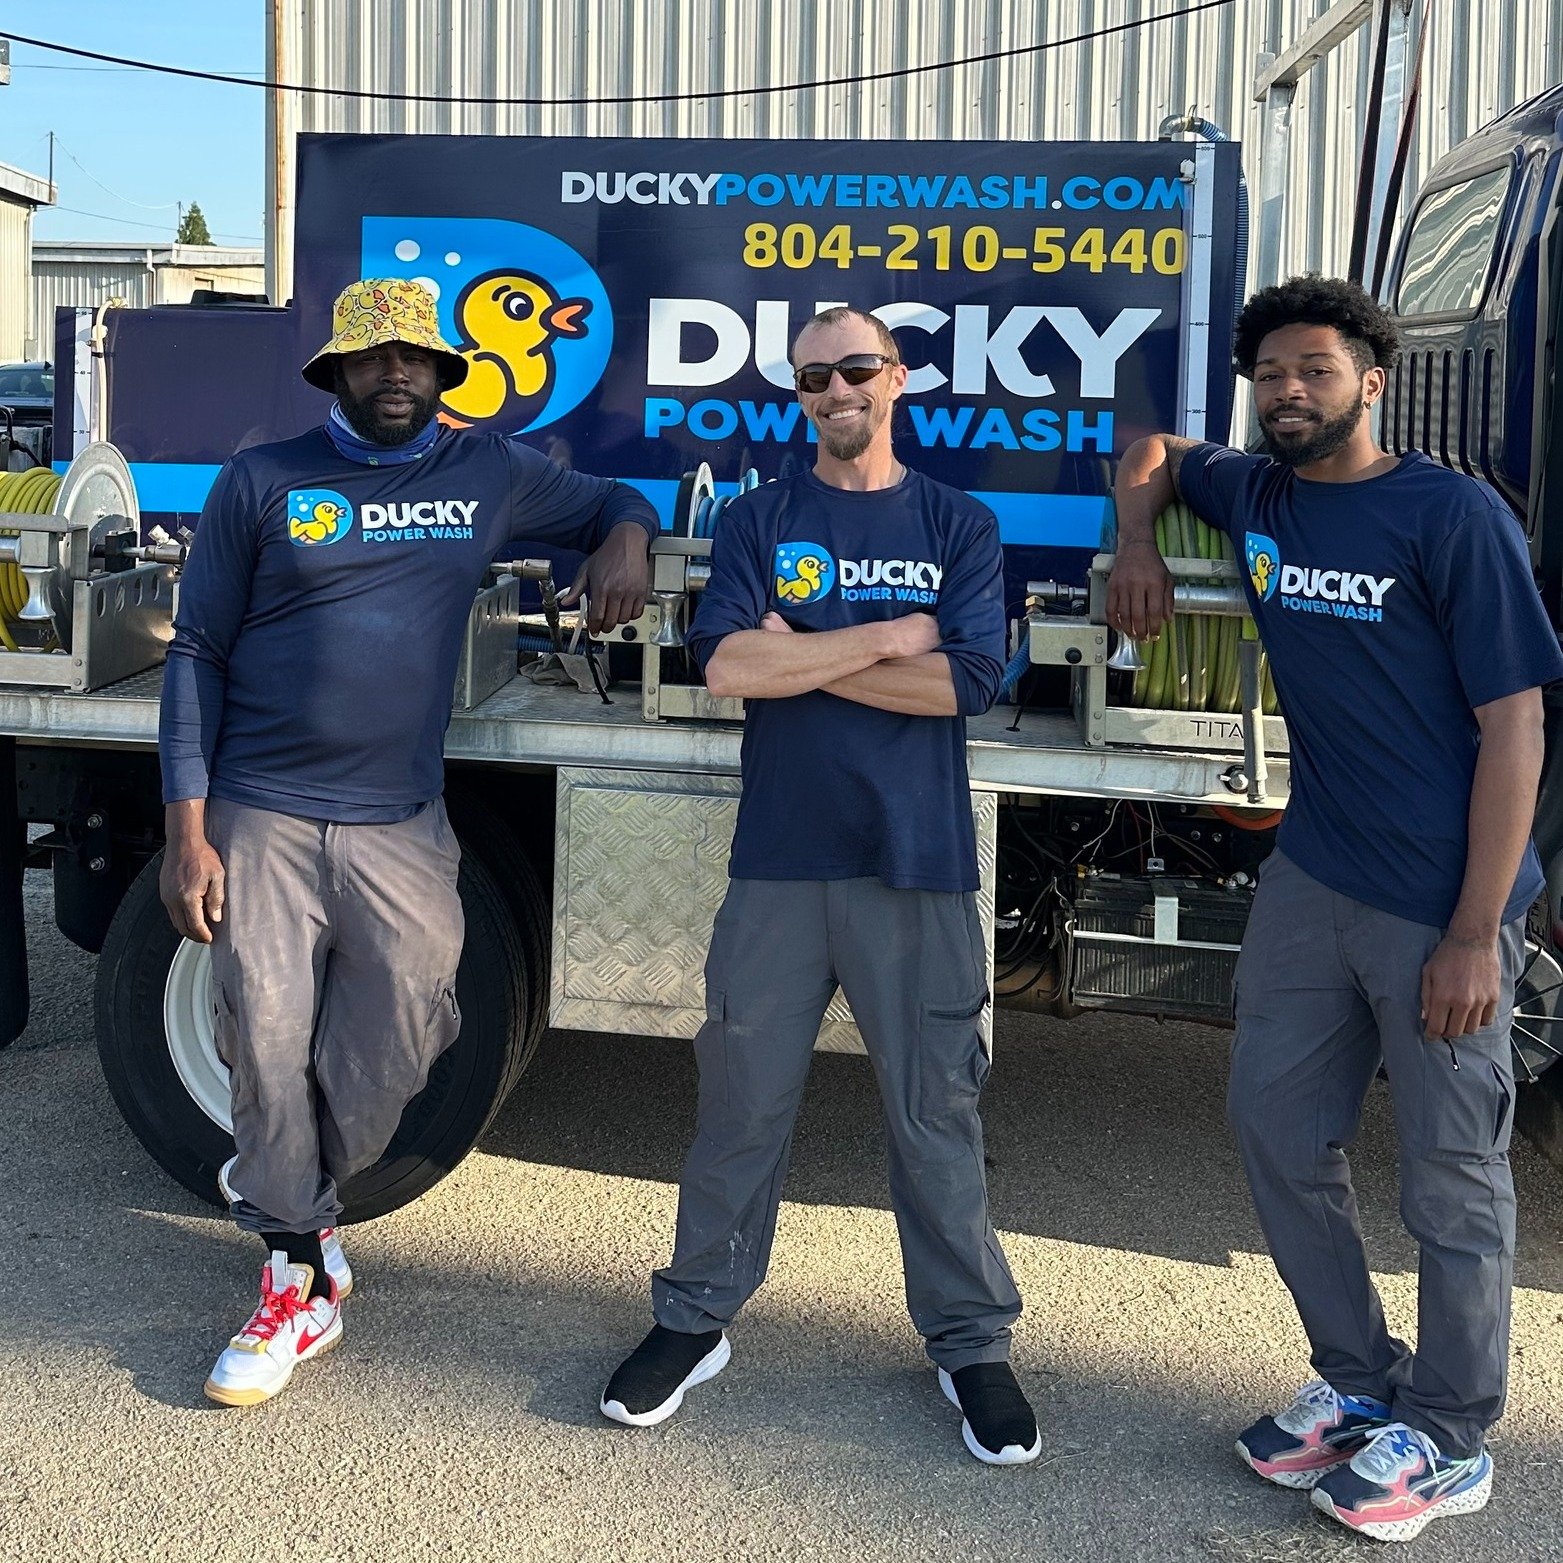 Join our team here at Ducky Power Wash!

Power Washing Technician $17-$22 hour

Job Description:
- Traveling with a coworker in company trucks to customers' homes and commercial properties.
-Cleaning exterior windows, pressure washing, gutter cleanin